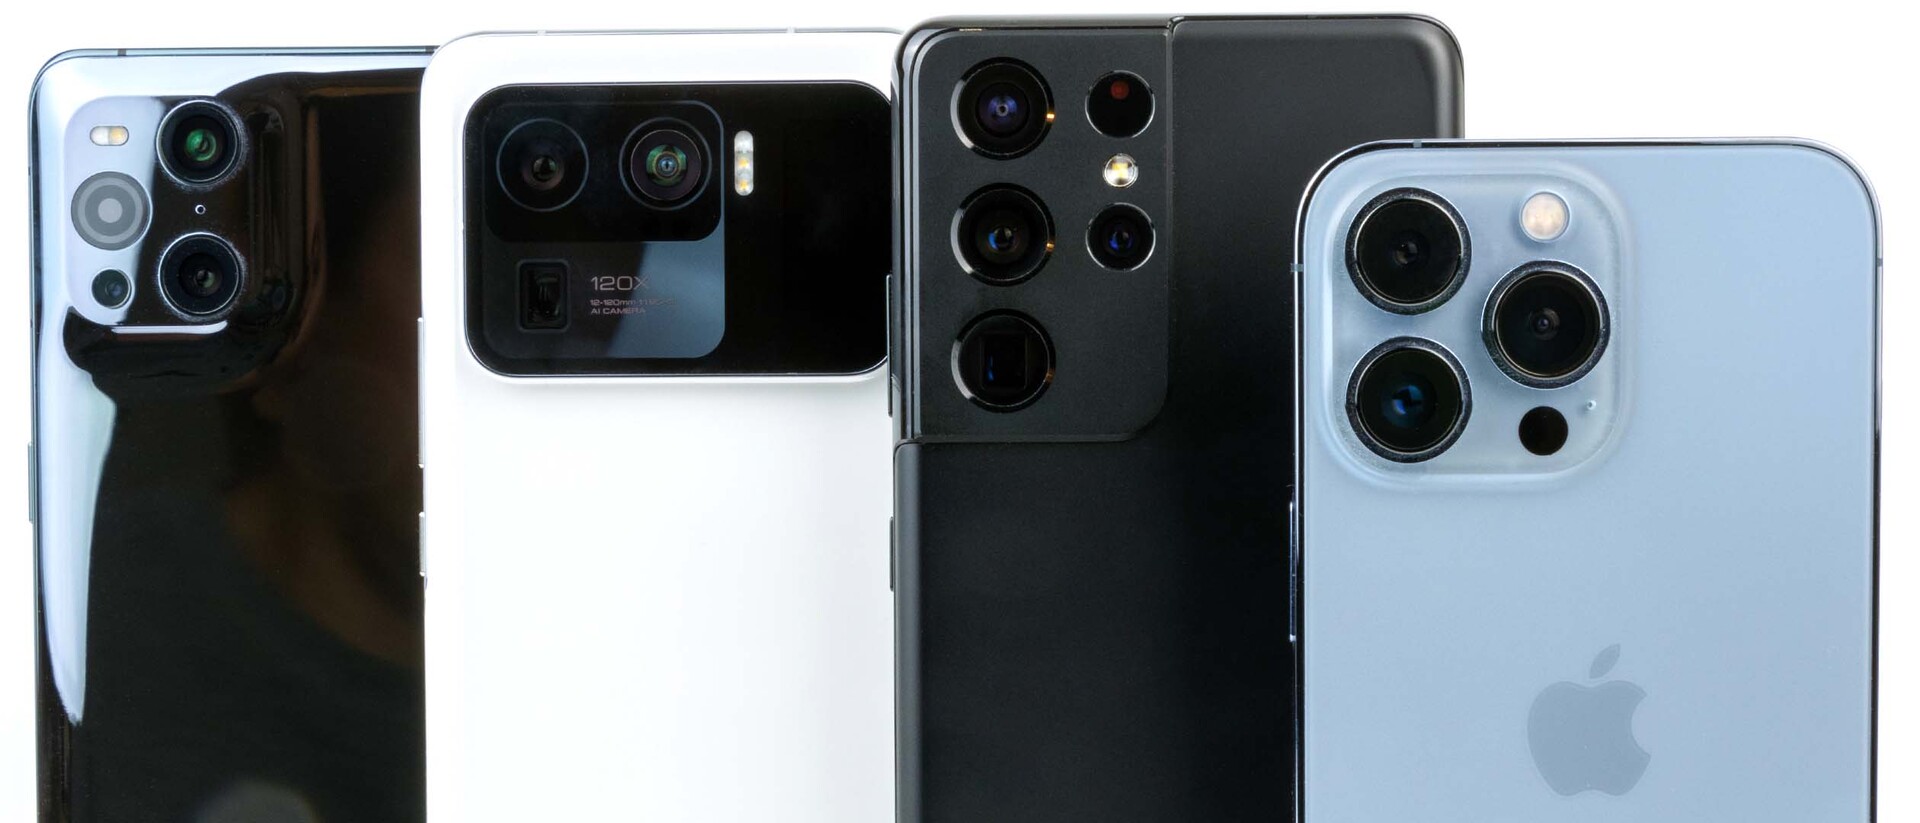 excuus houding Vertellen Camera comparison: These high-end smartphones take the best photos -  NotebookCheck.net Reviews